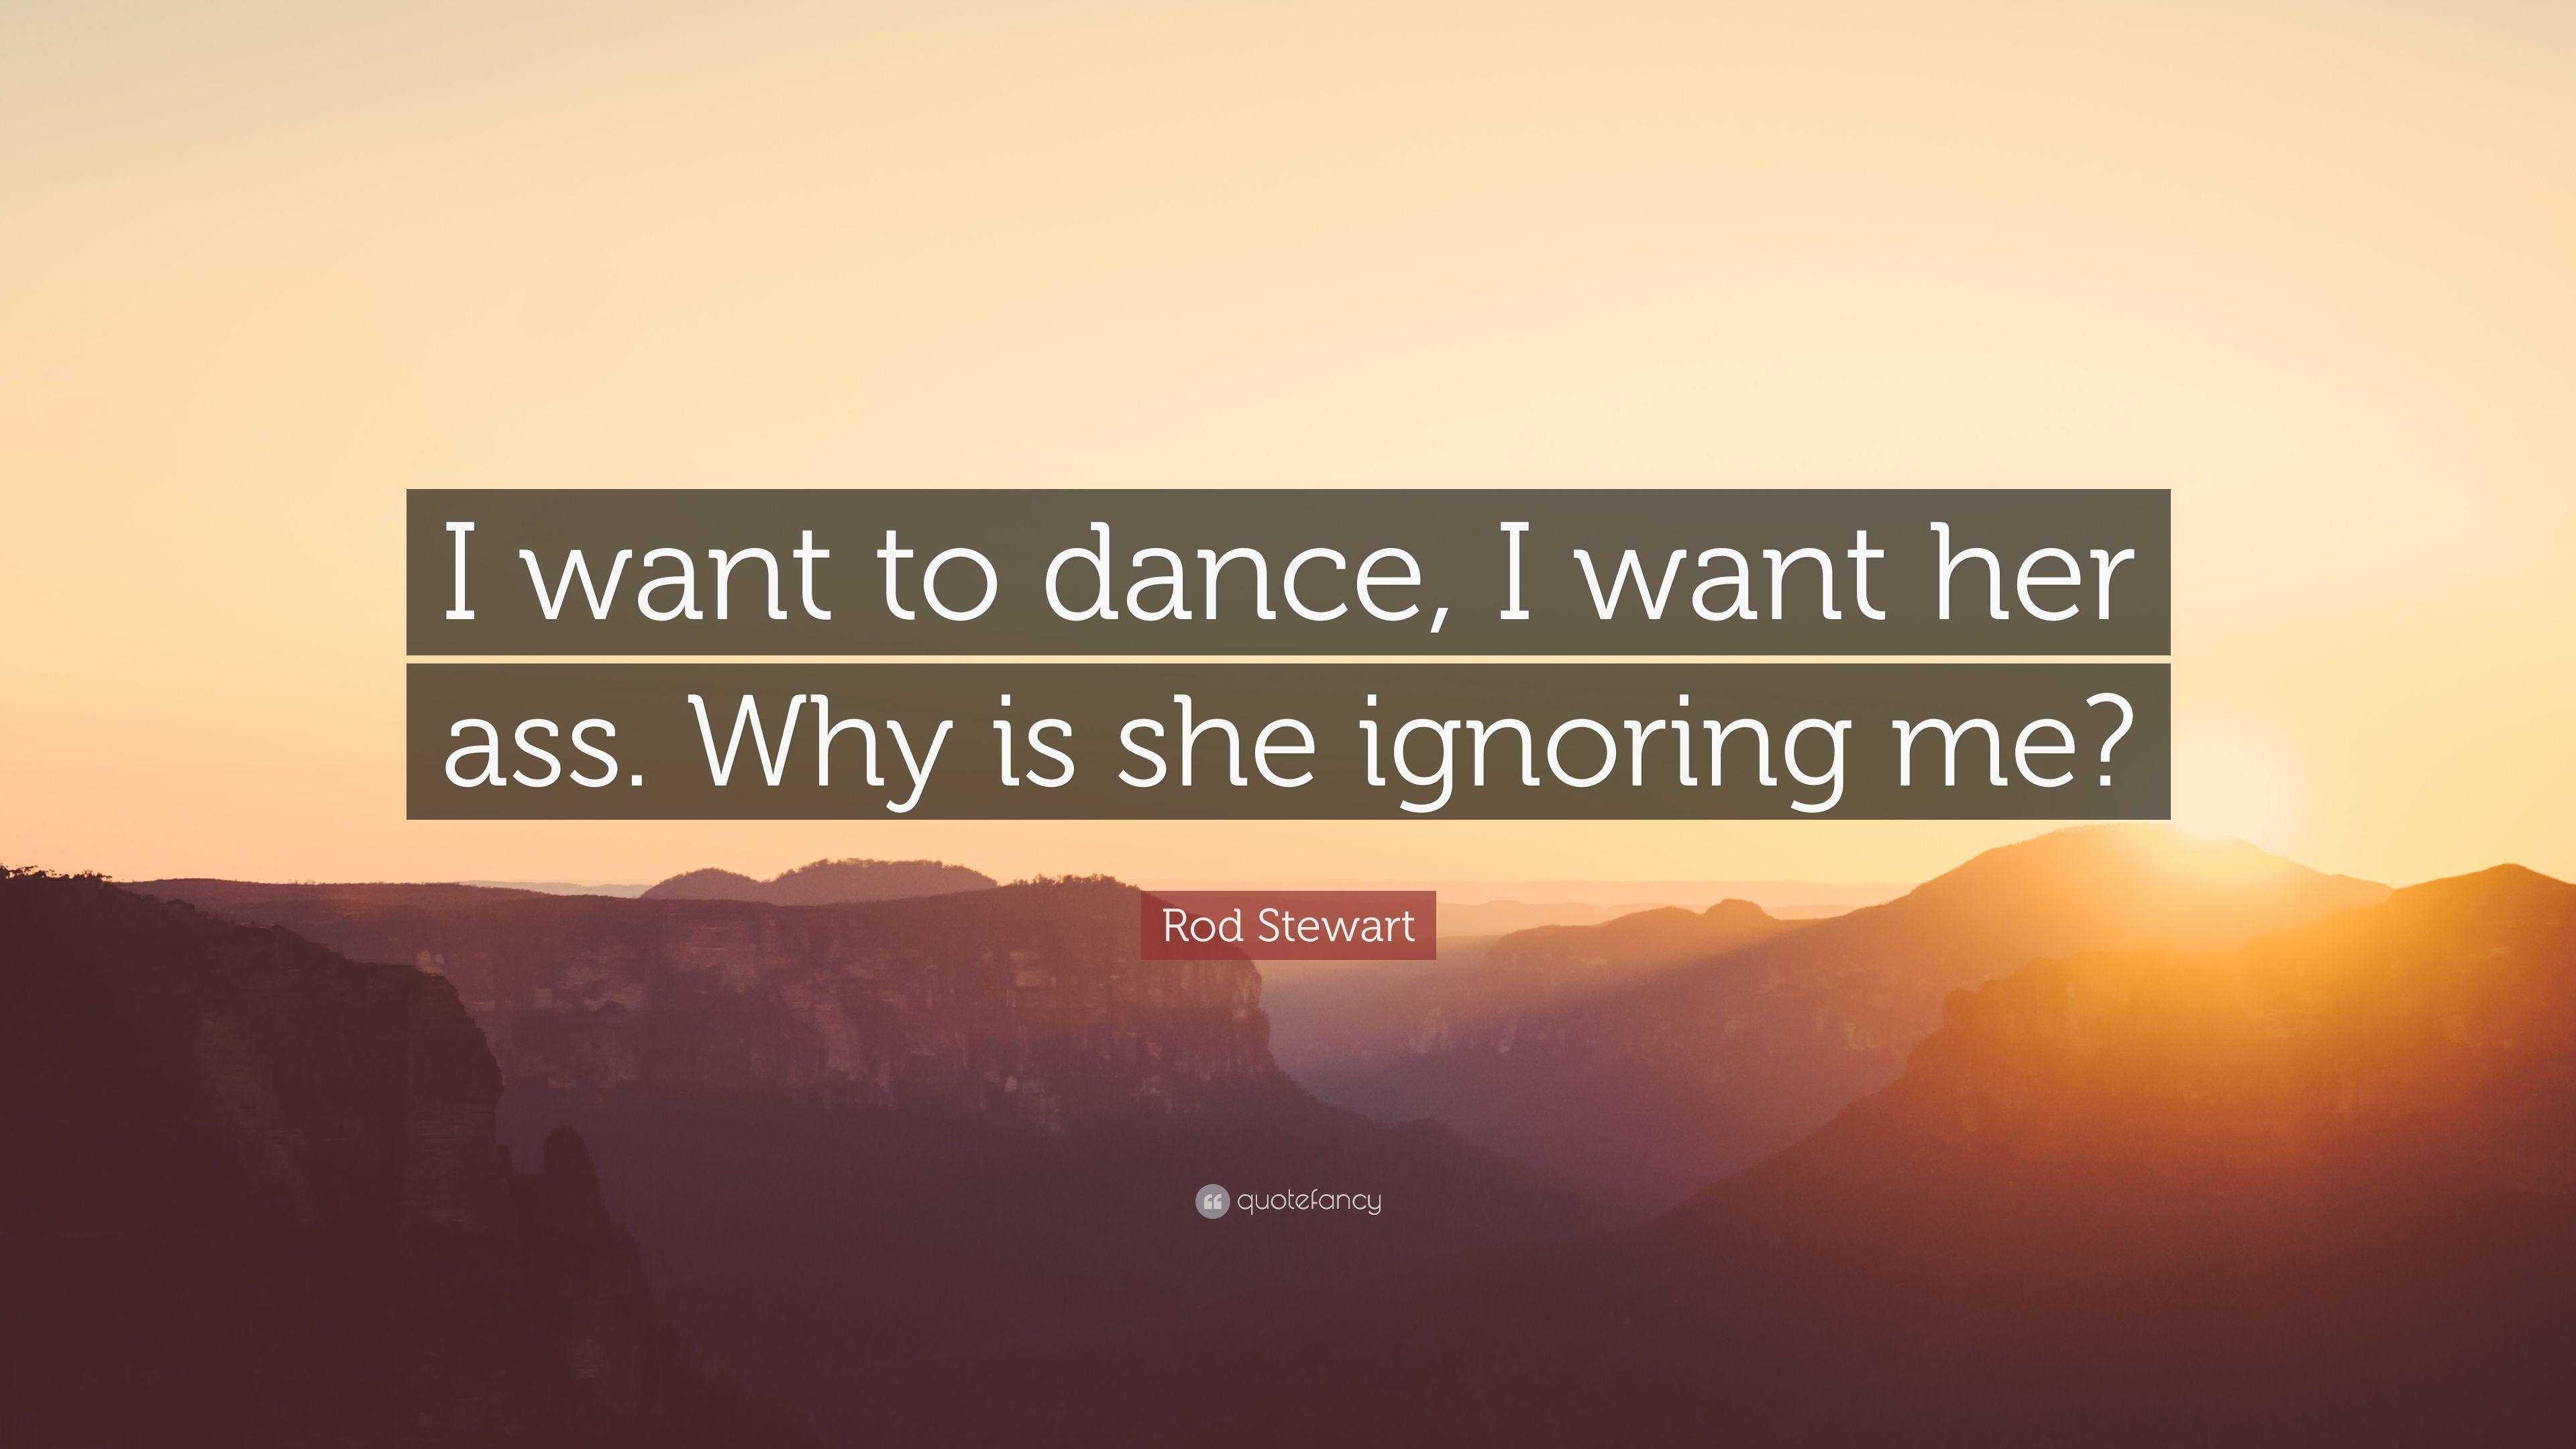 Rod Stewart Quote: “I want to dance, I want her ass. Why is she